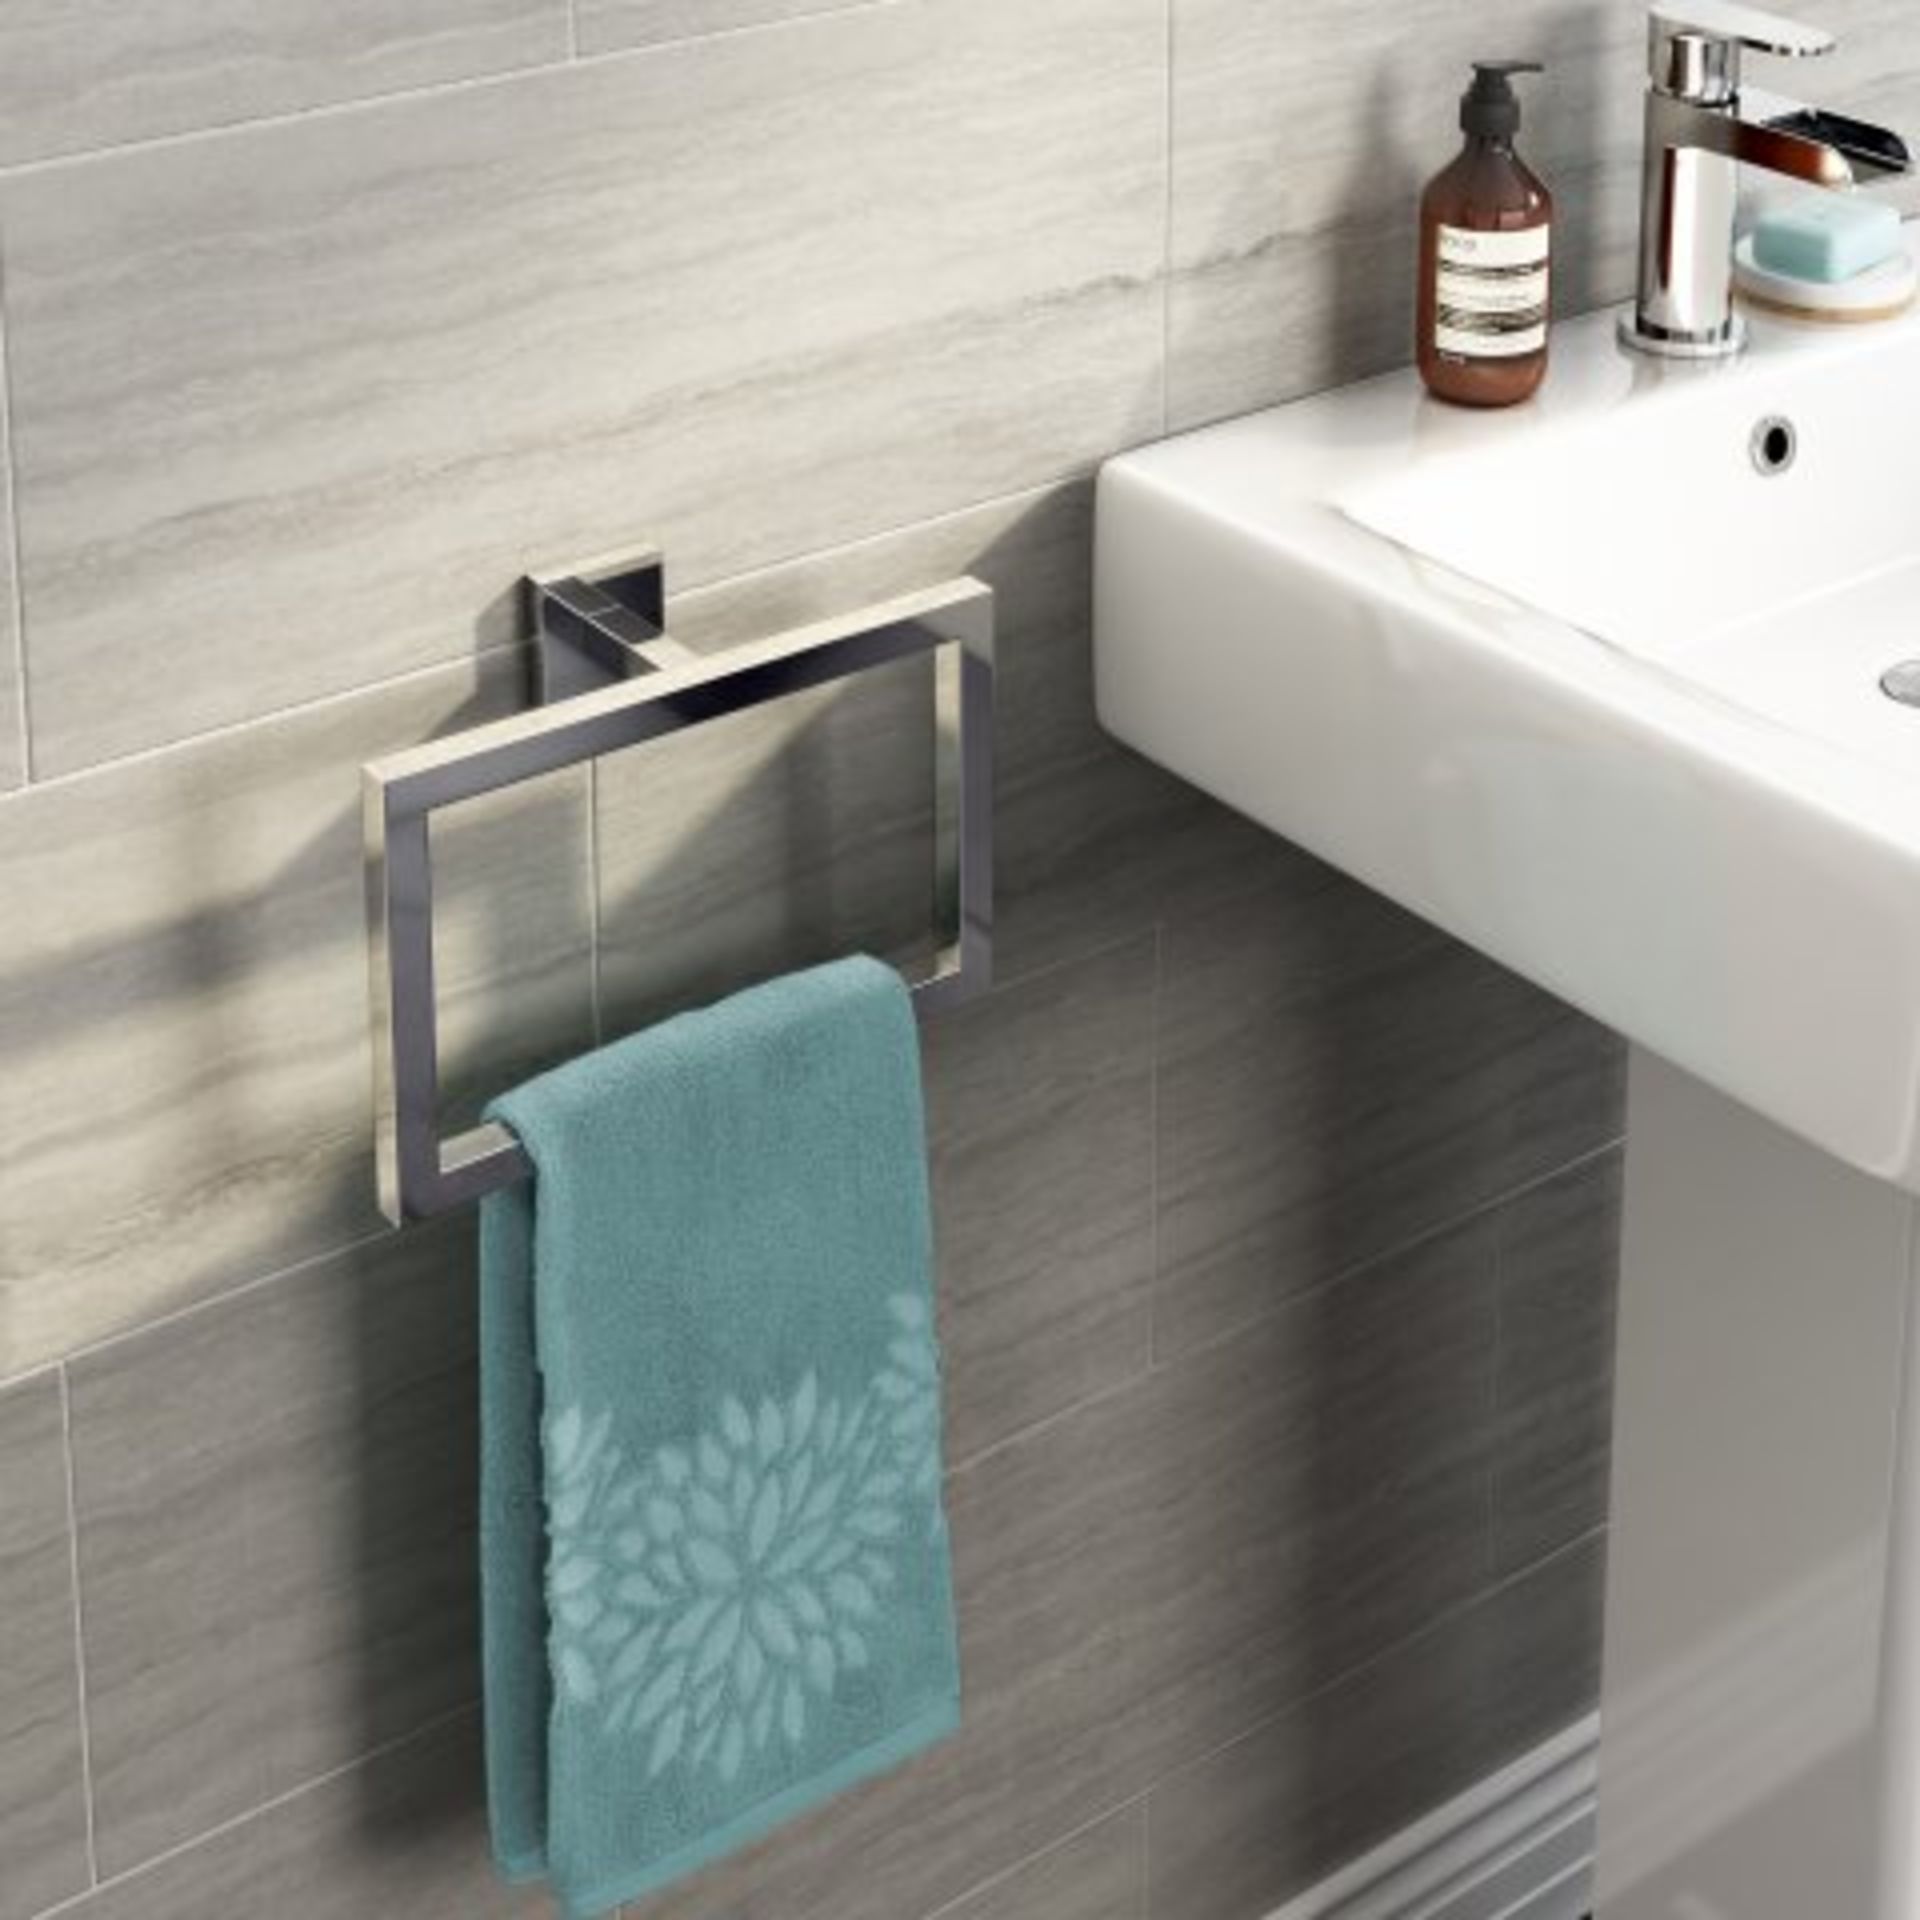 (H29) Jesmond Towel Ring Paying attention to detail can massively uplift your bathroom d?cor. Our - Image 2 of 3